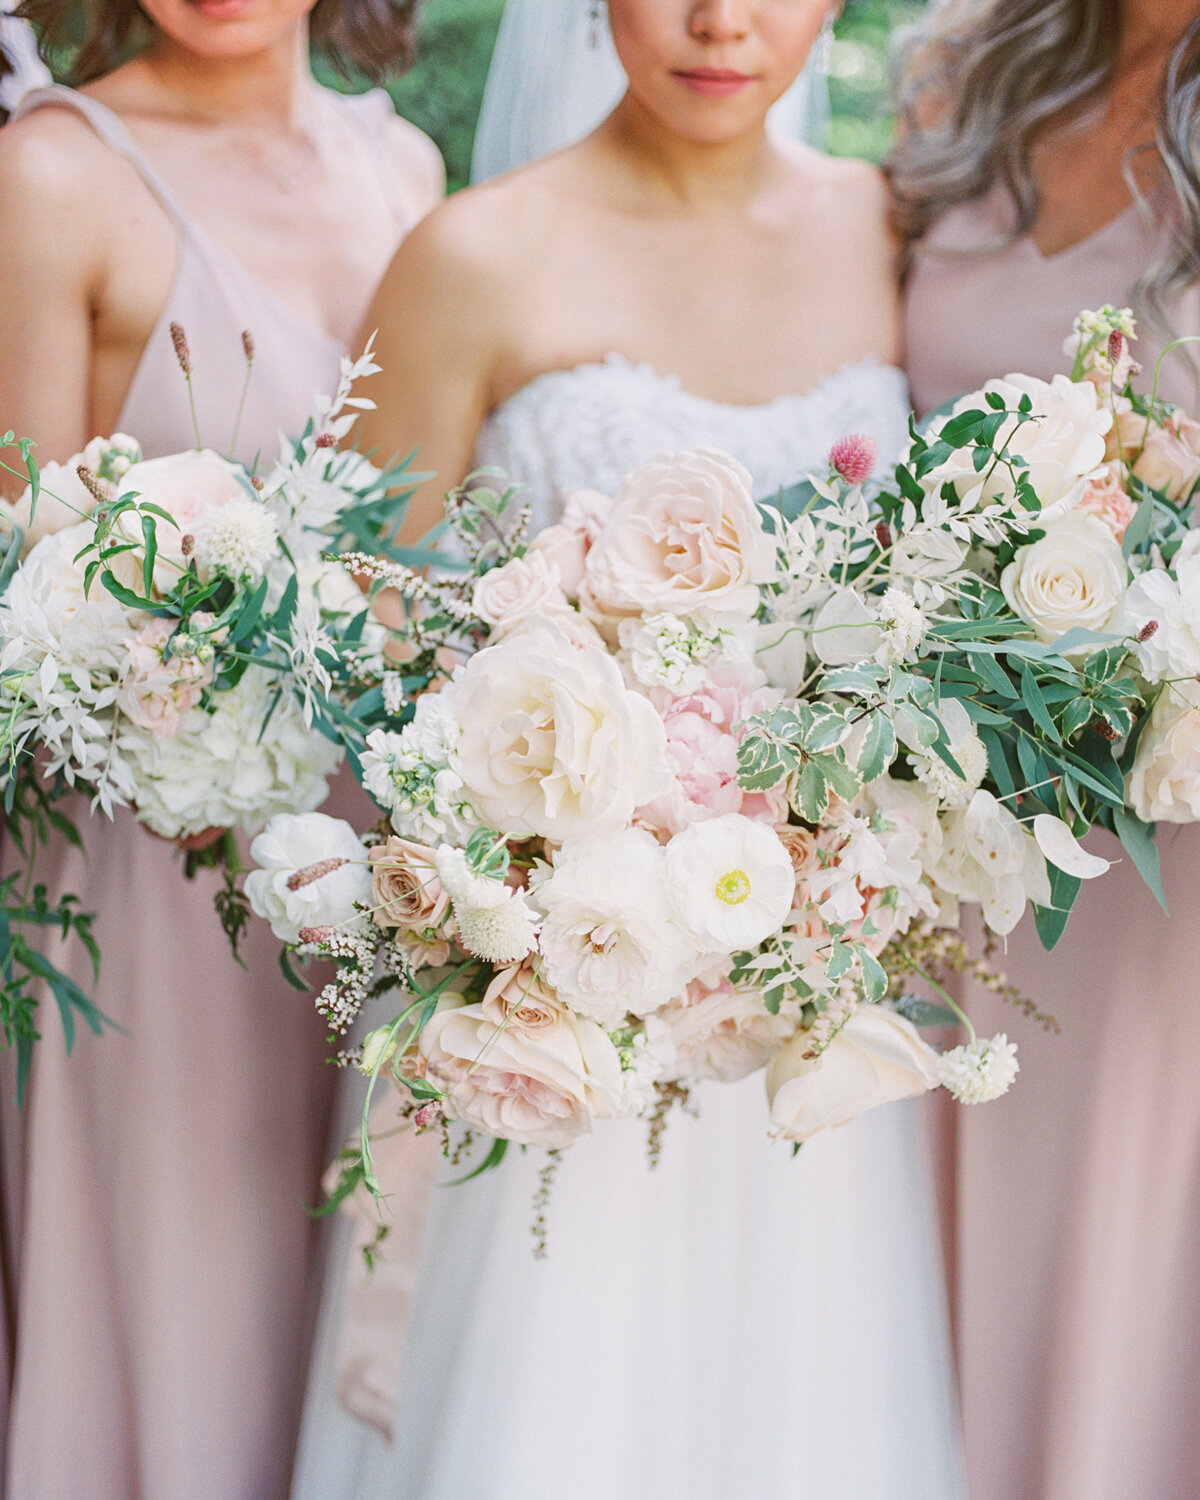 Bridesmaids bouquets in blush